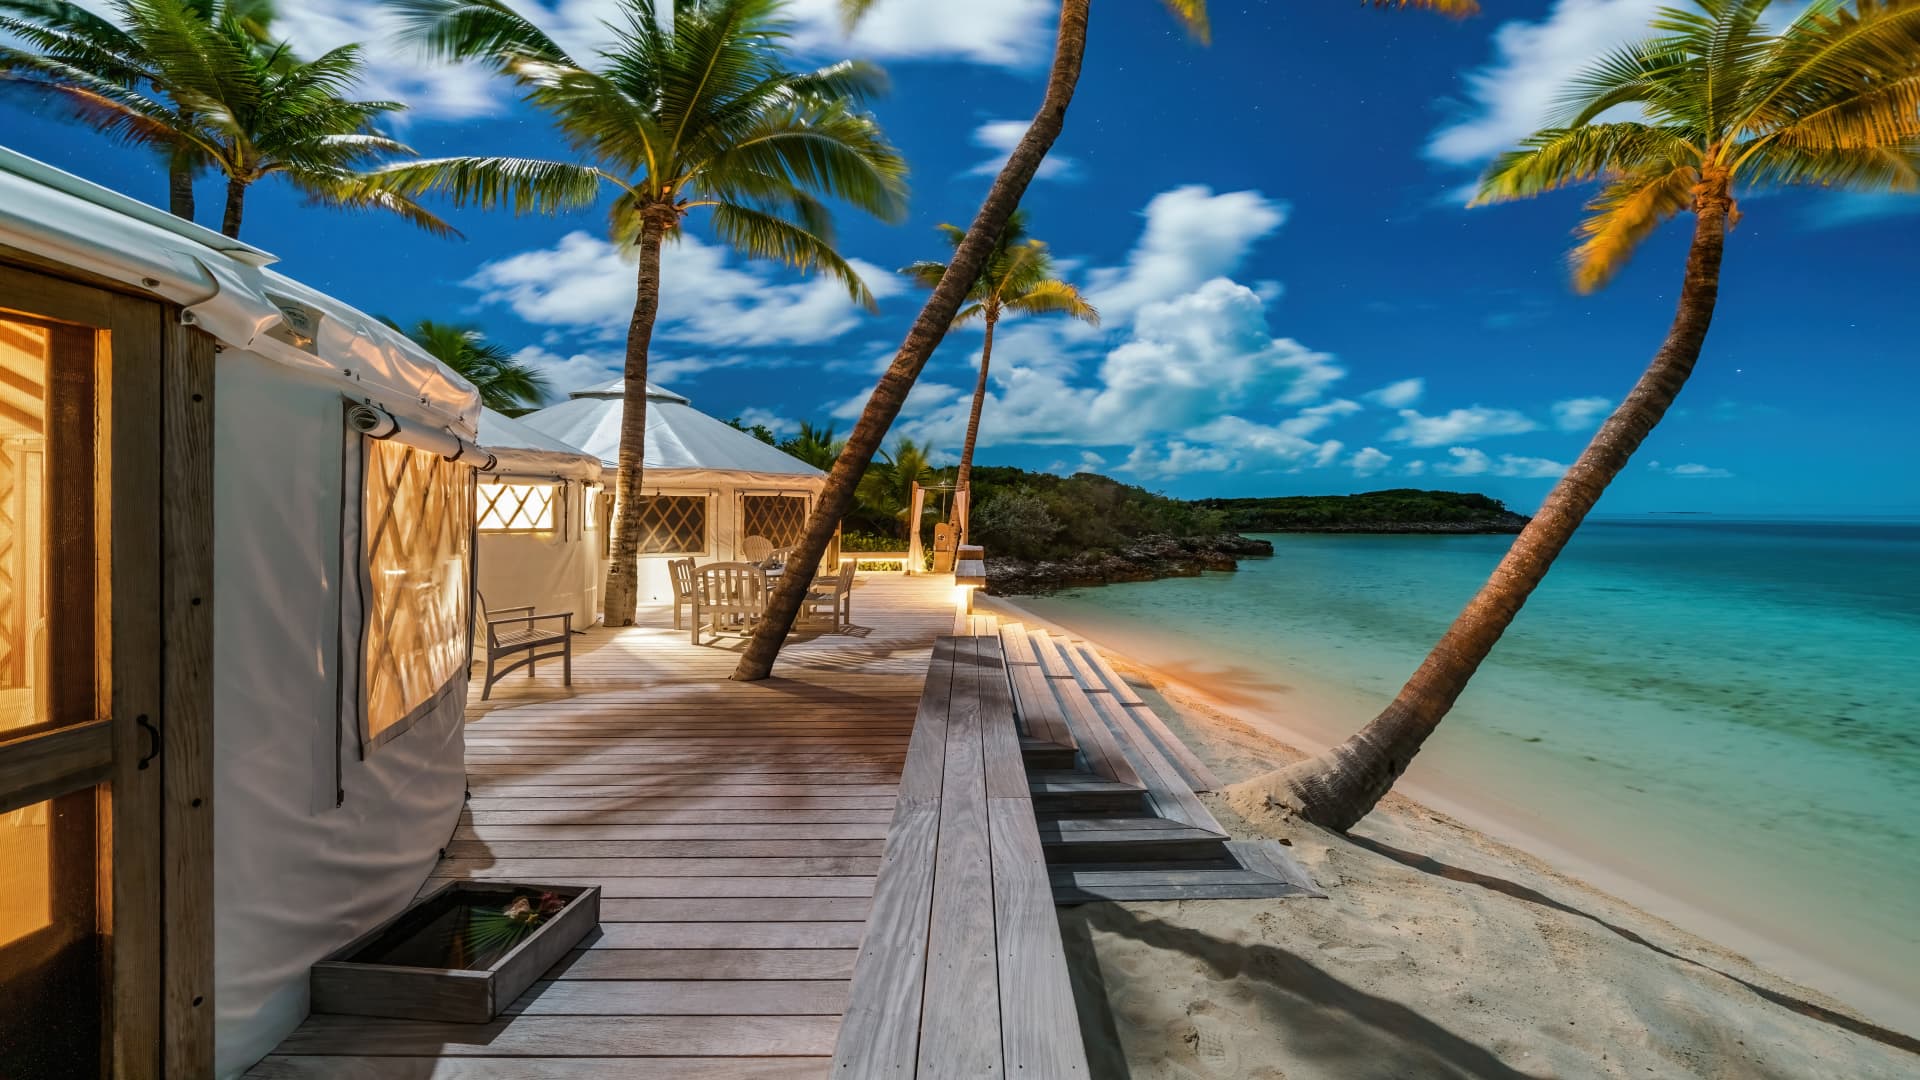 Beachfront yurts with wood decks are steps away from the water's edge.